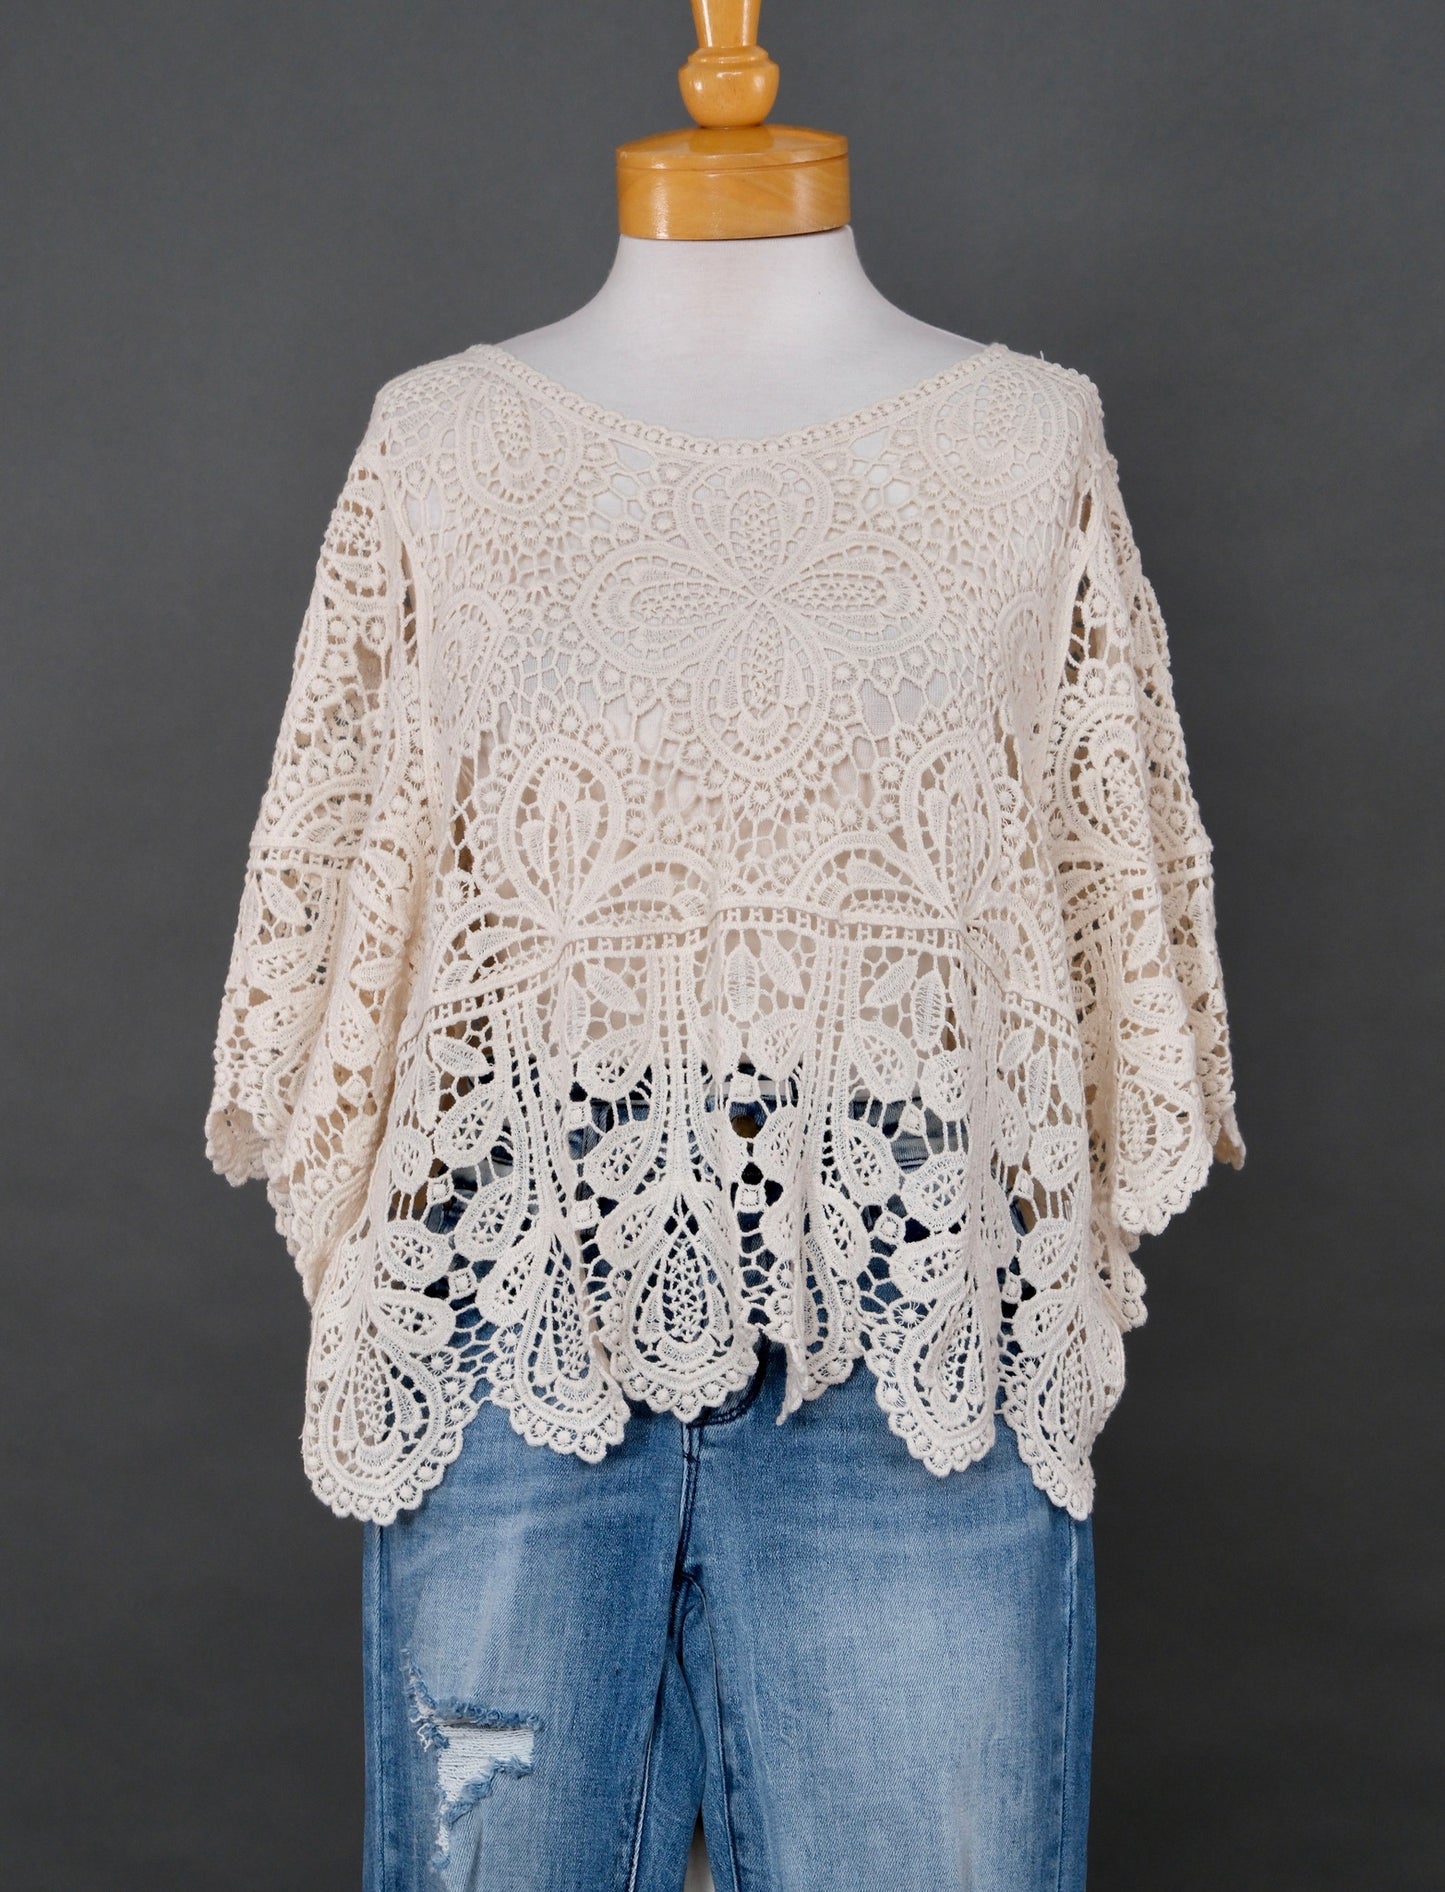 Clementine Crochet Top in Natural